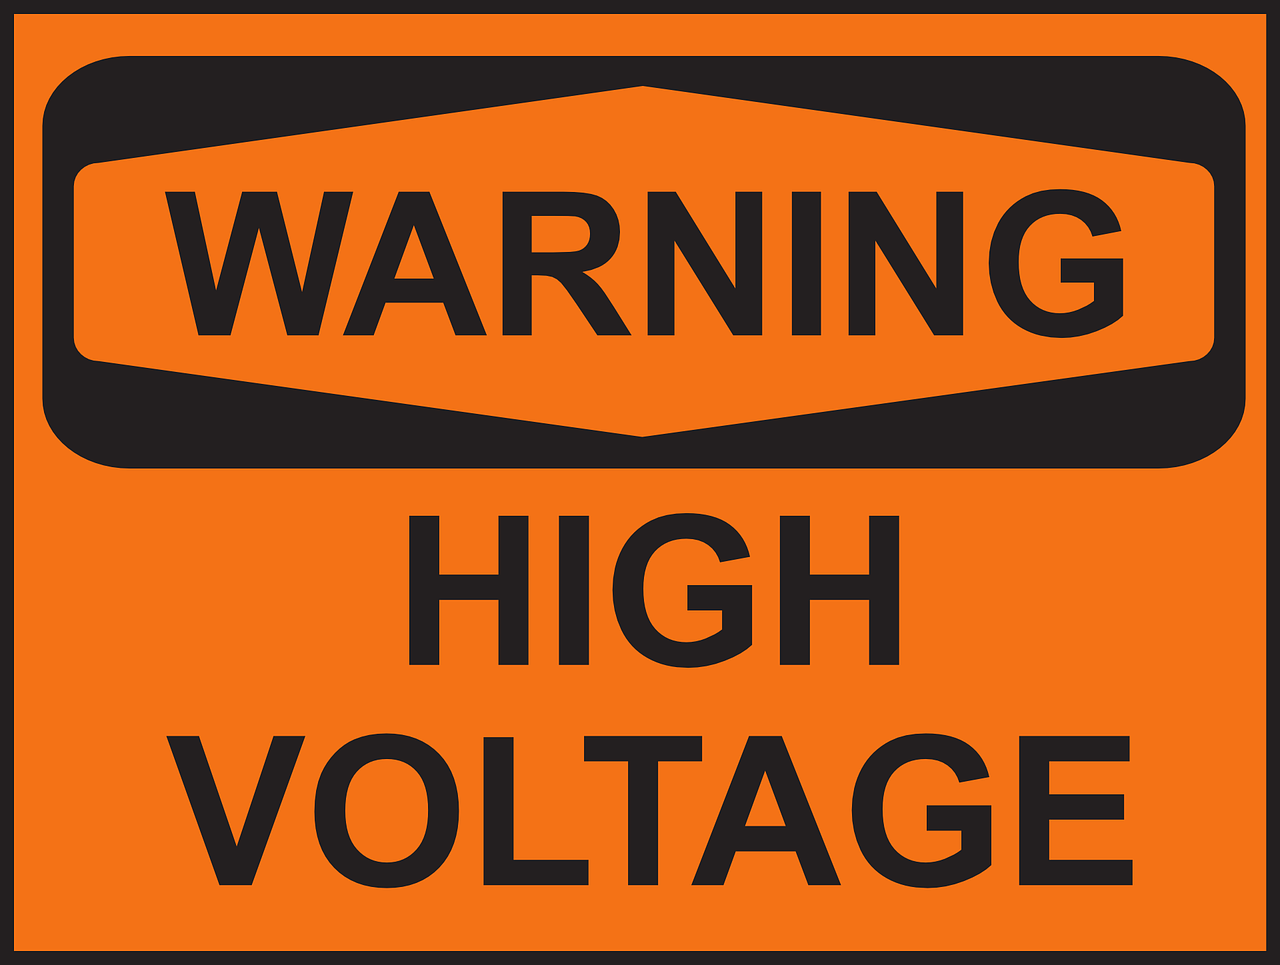 A sign in black letters on an orange background. It says: 'Warning - High Voltage'.